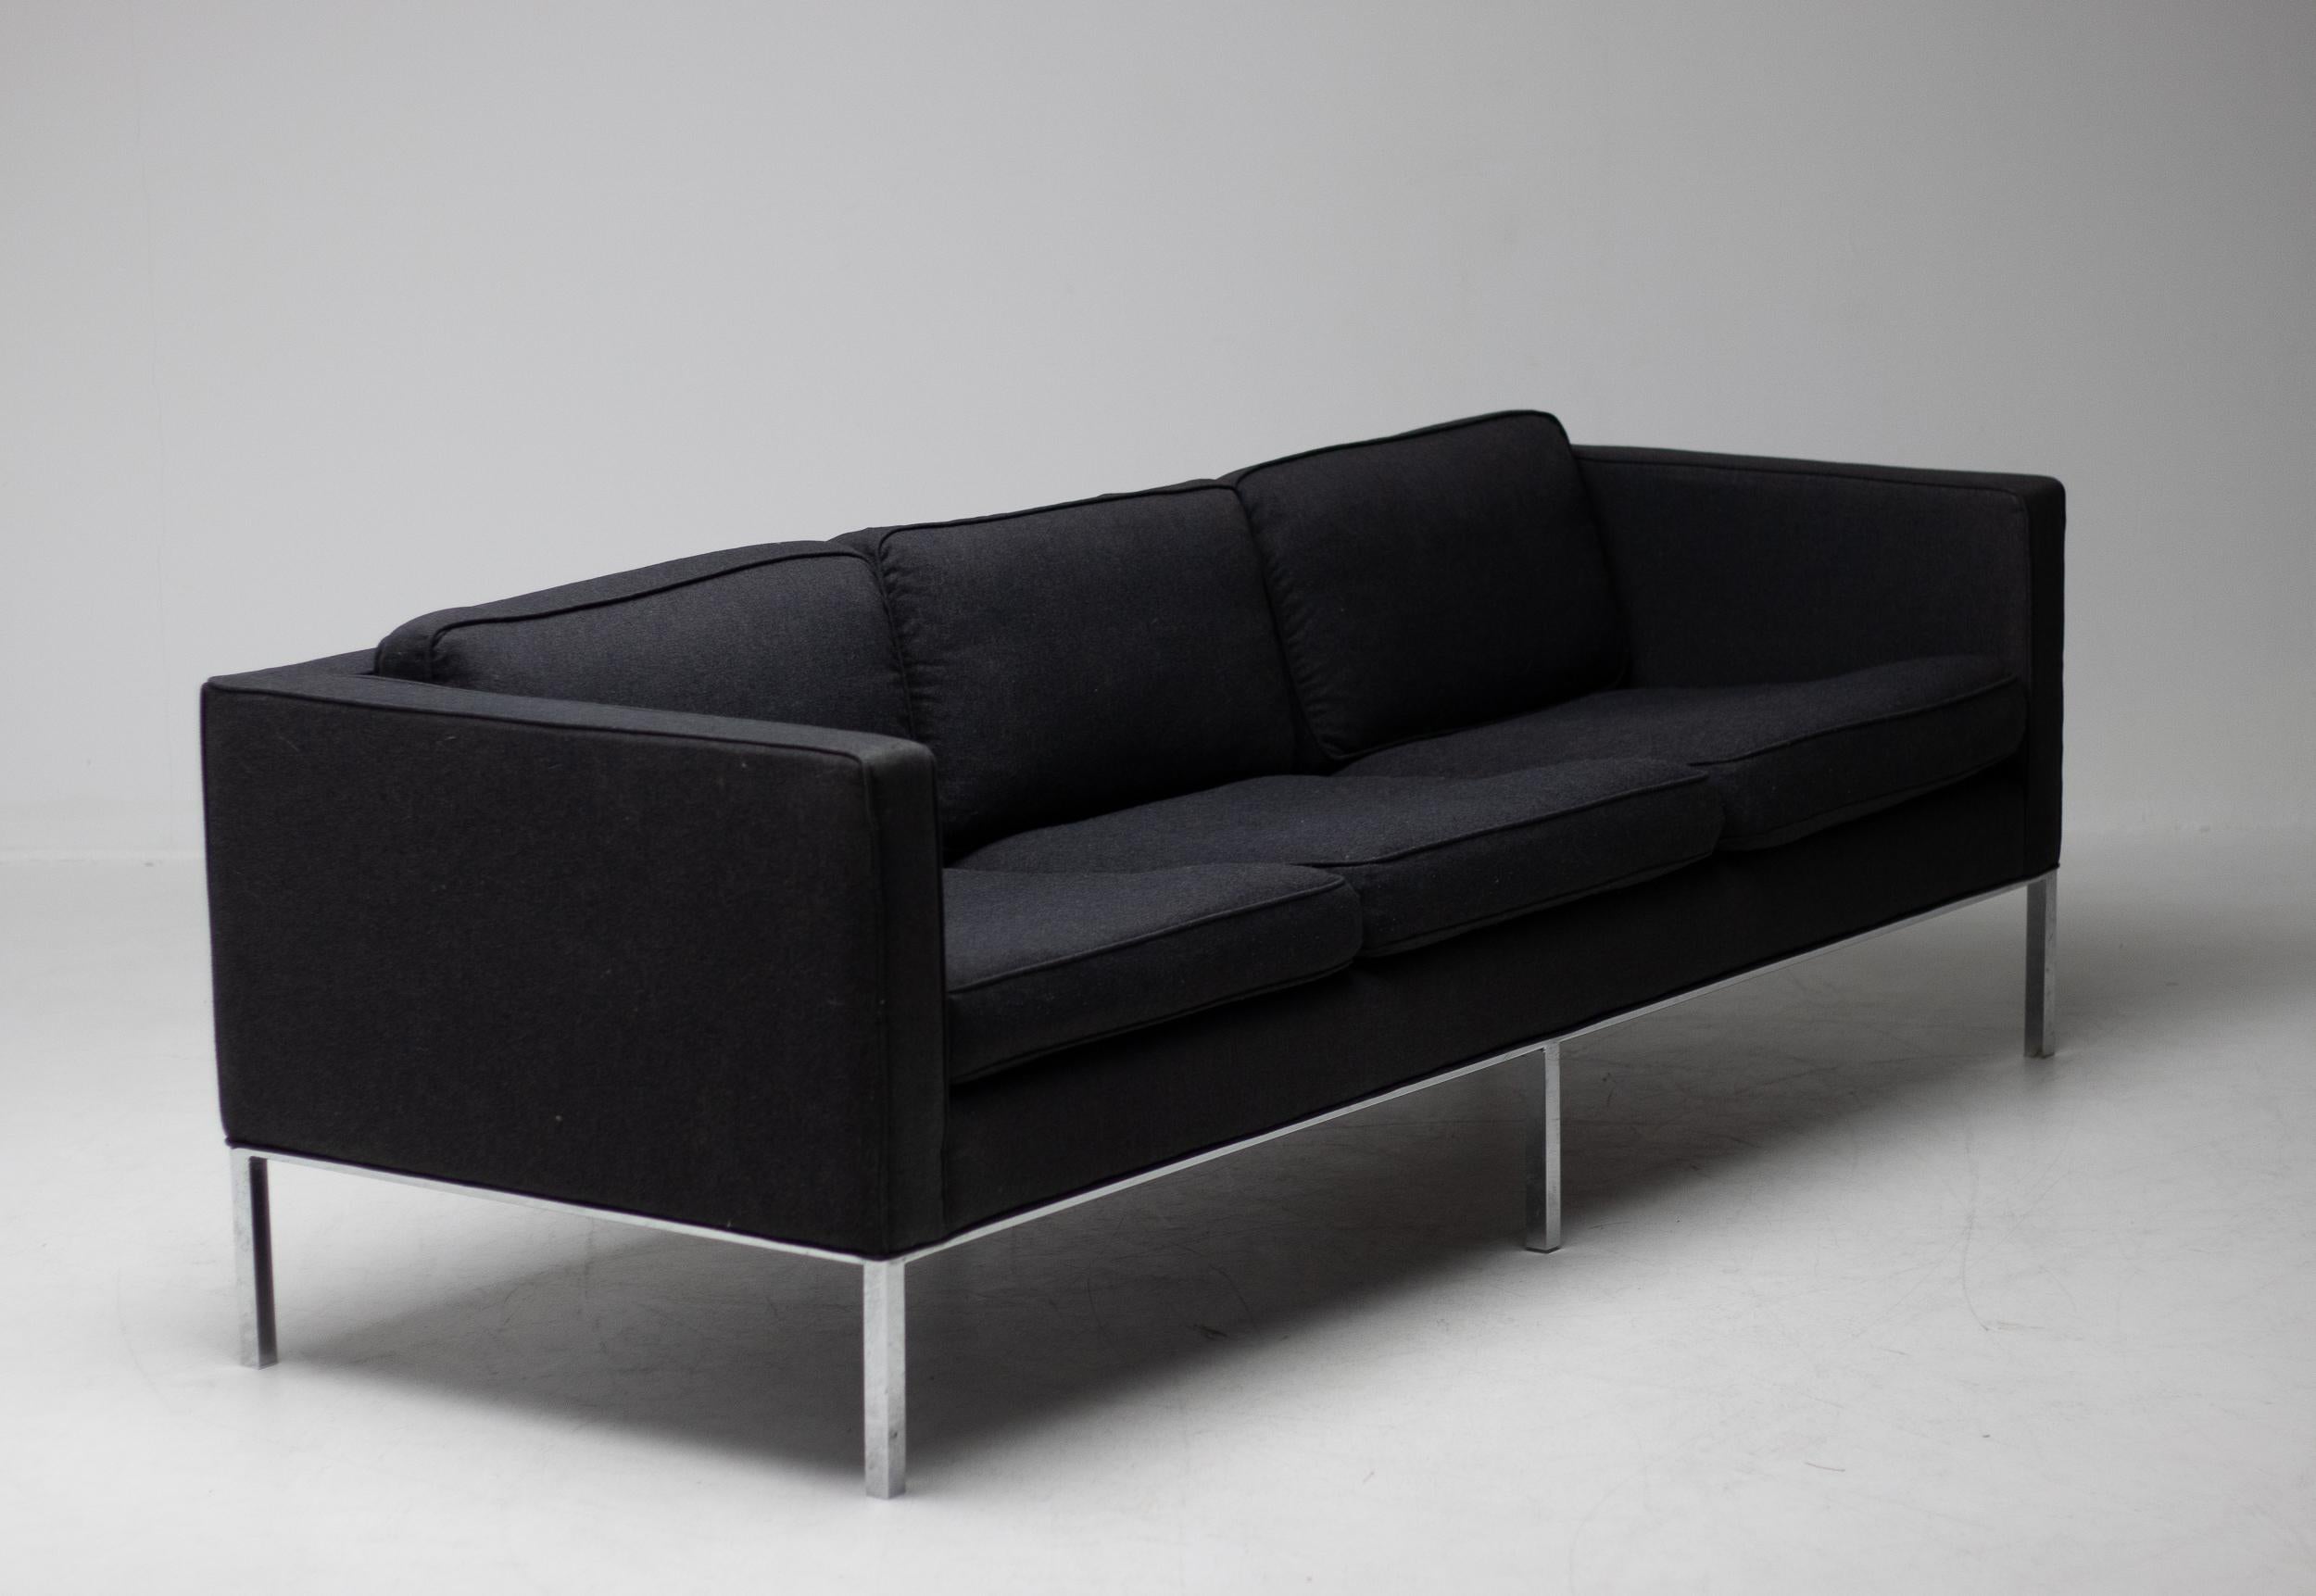 Artifort 905 3-seater sofa by the Artifort design team lead by Kho Liang Ie, 1964.
Upholstered in a dark grey woolen fabric by De Ploeg that is not damaged but slightly worn and stained.
Reupholstery recommended.

Kho Liang Ie (1927–1975), a pivotal